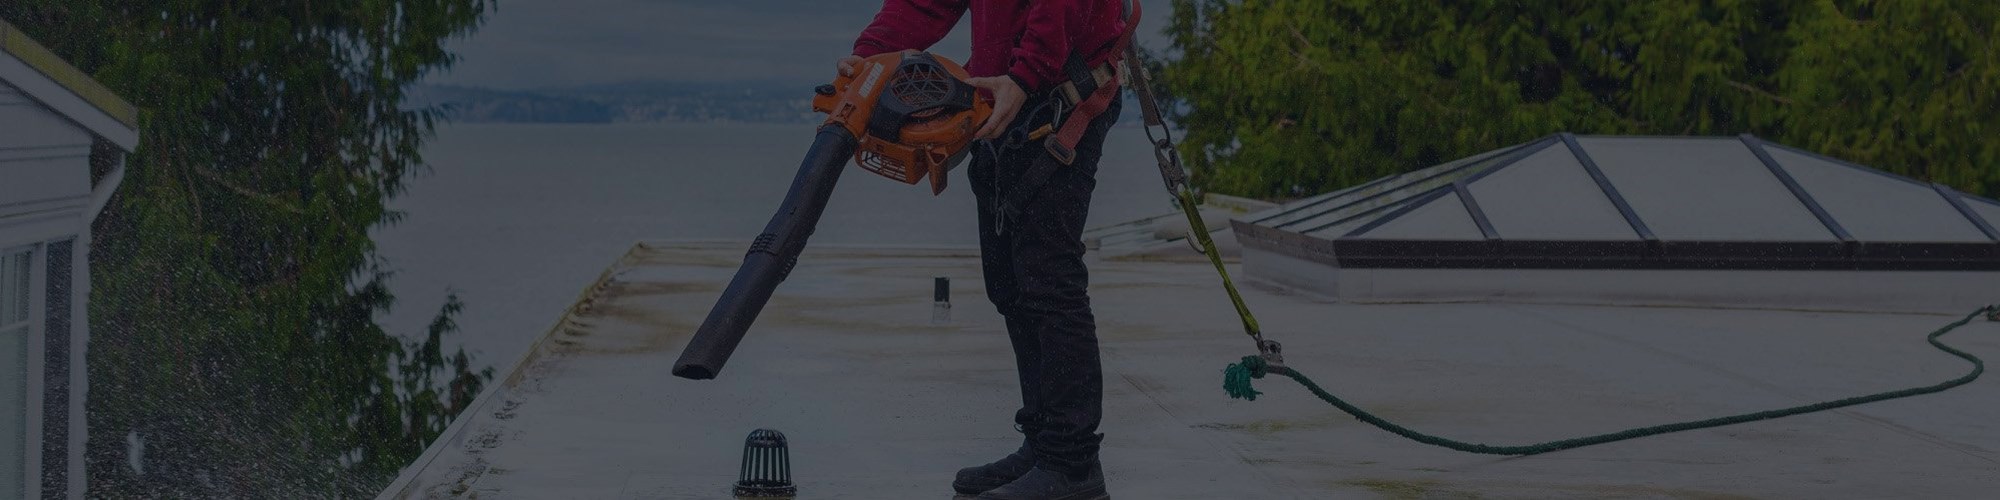 Seattle roofers needed